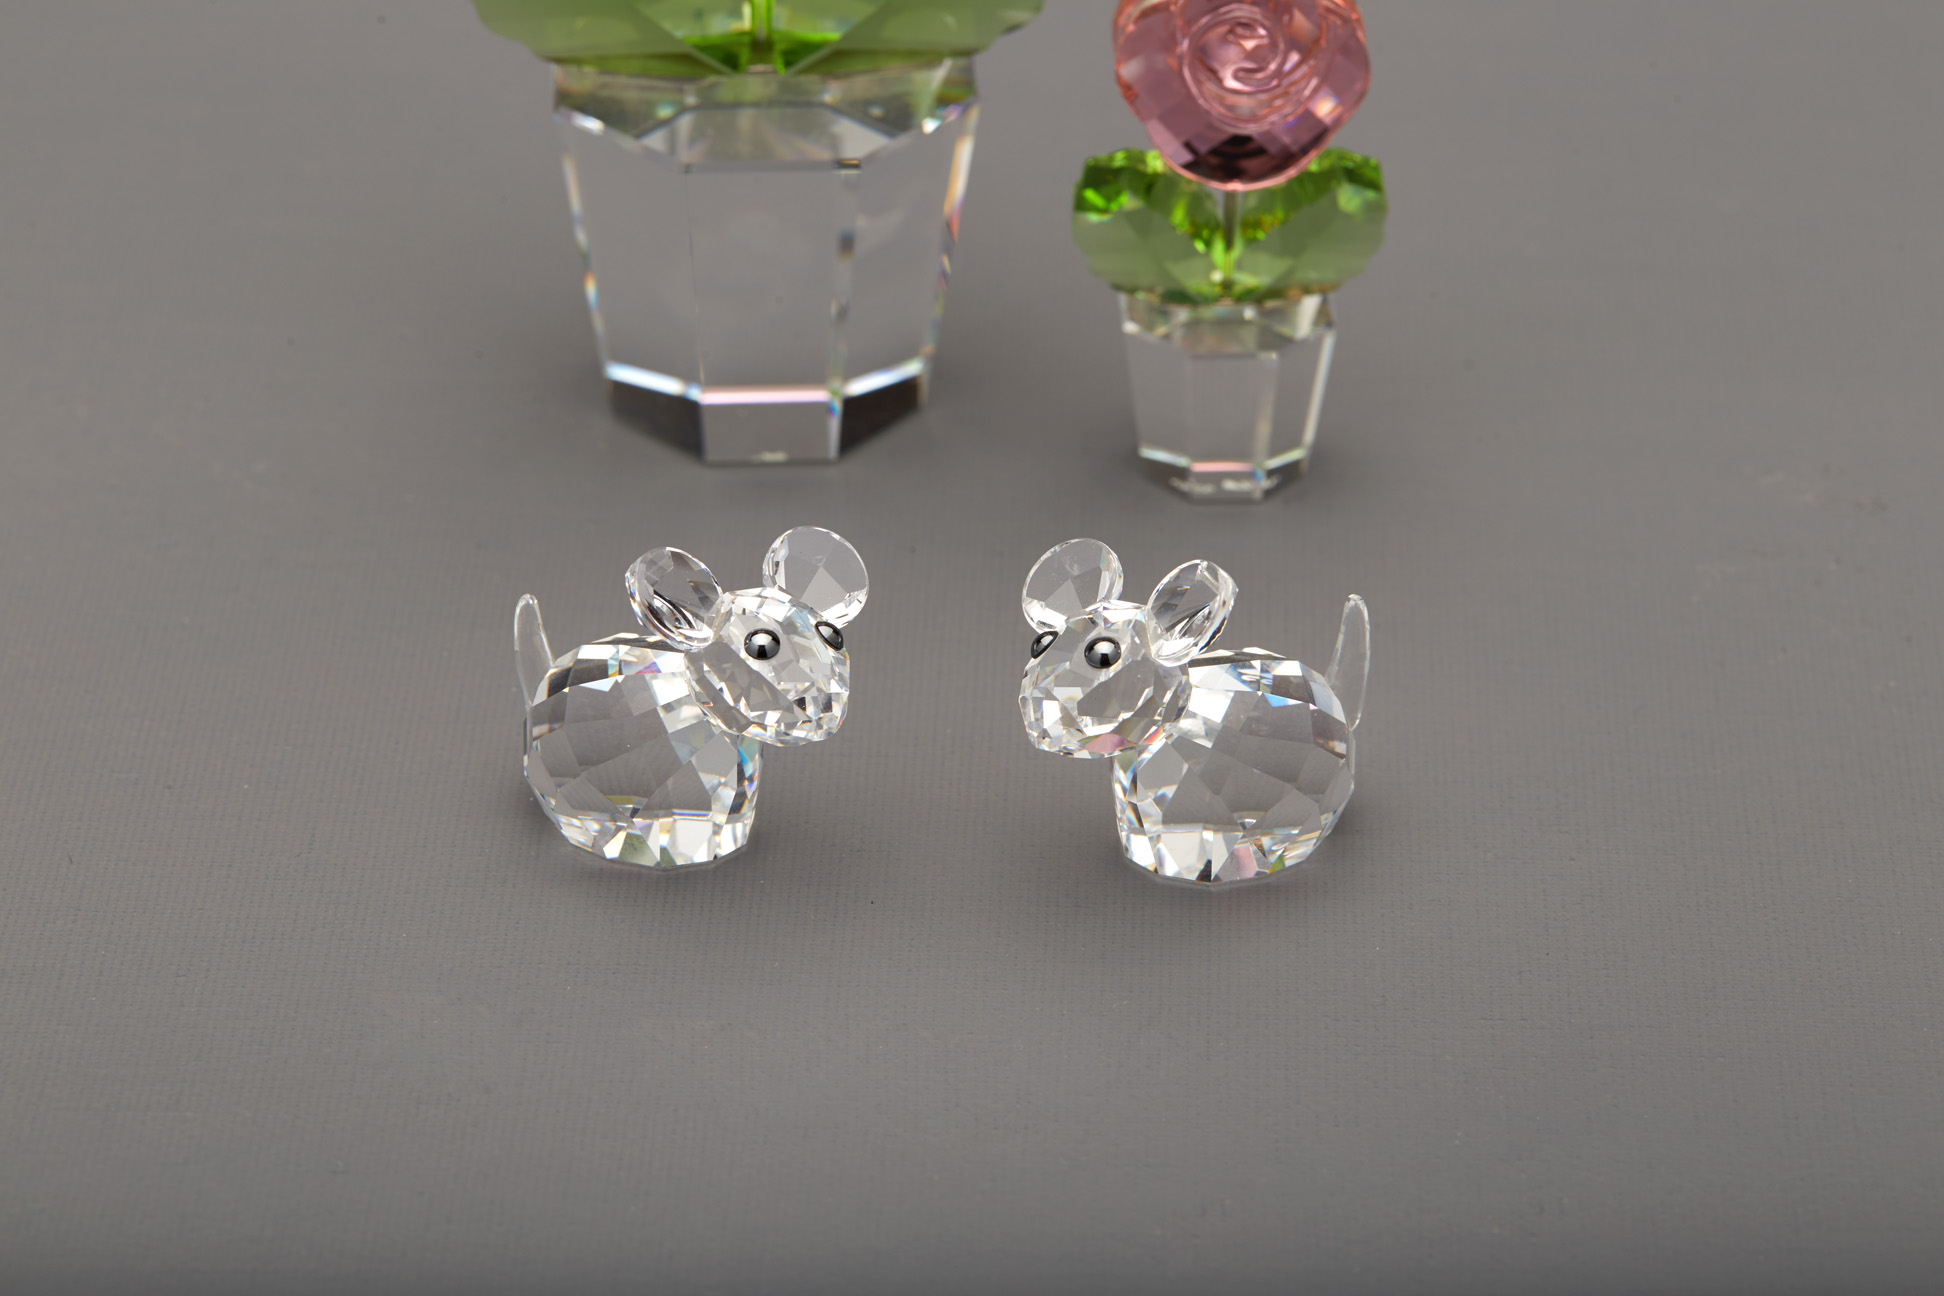 TWO SWAROVSKI CRYSTAL FLOWERS & TWO MICE - Image 3 of 6